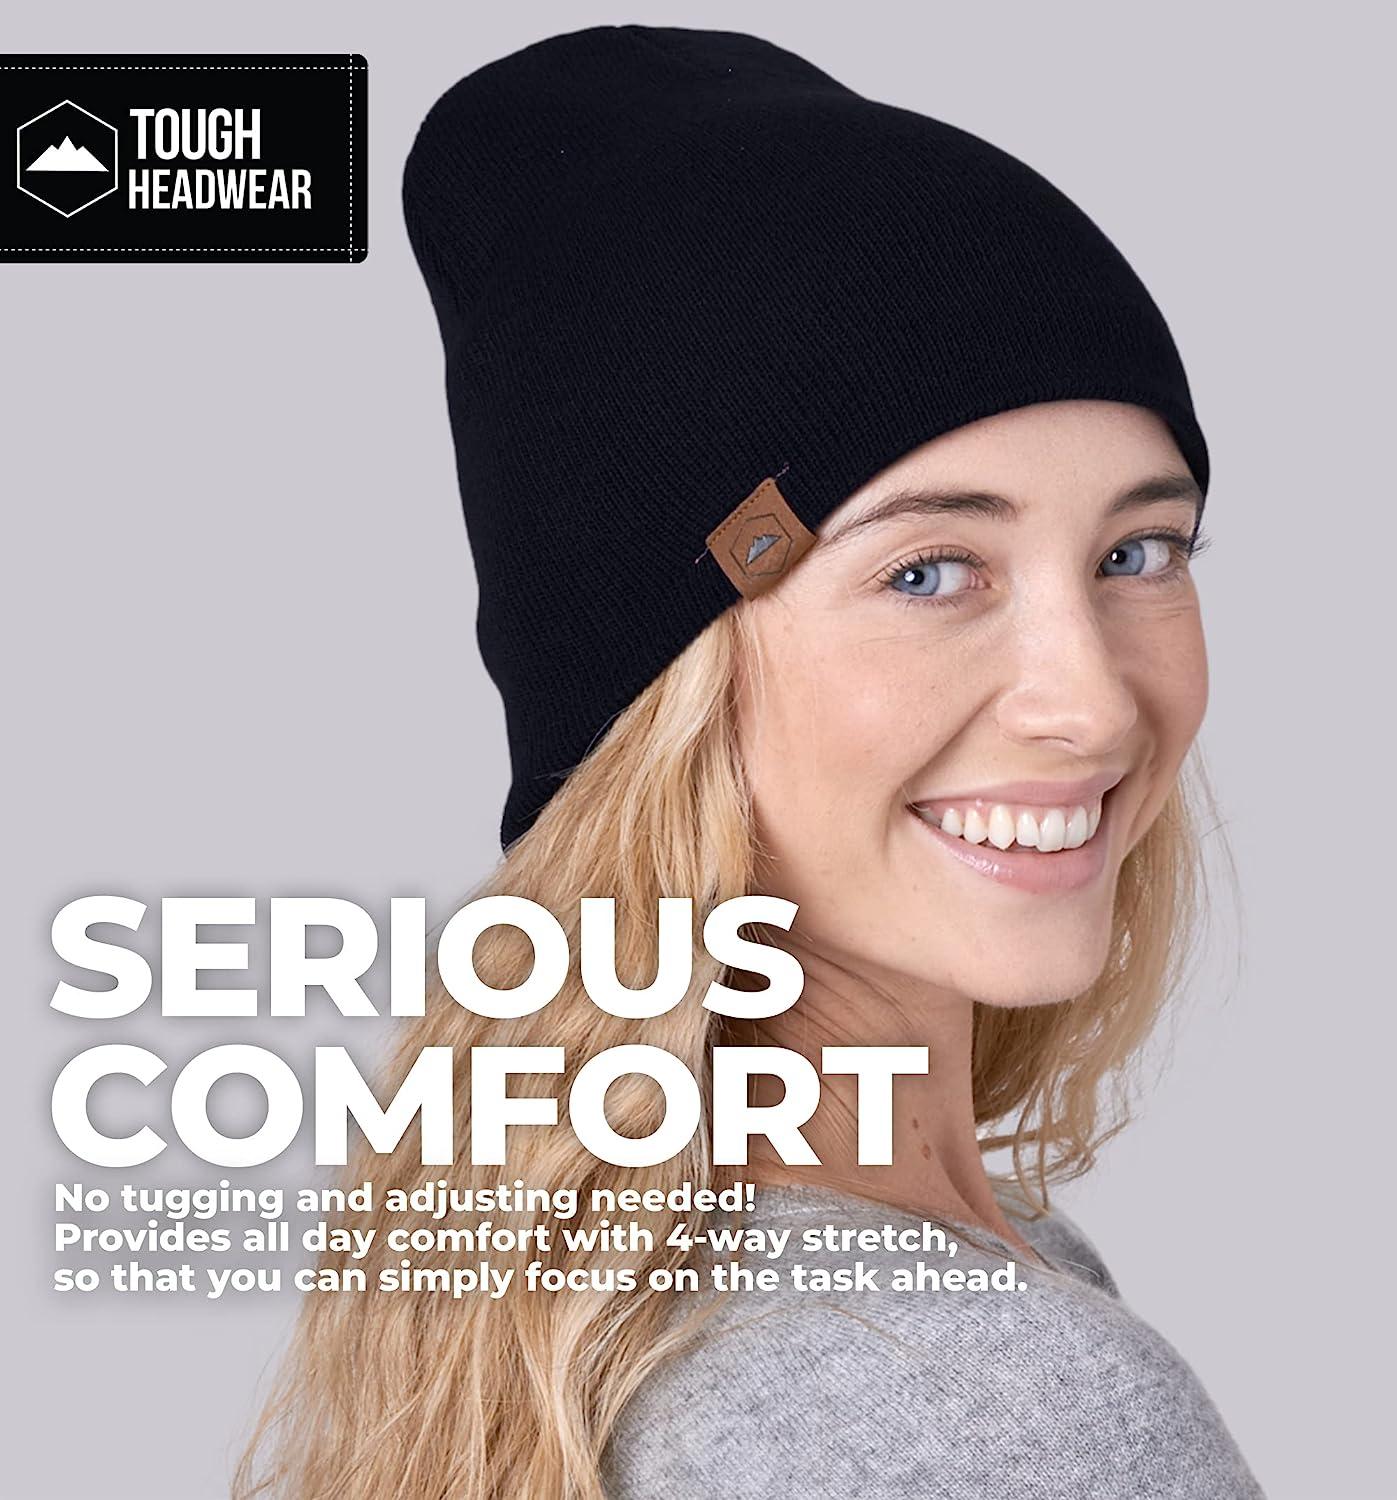 Tough Headwear Knit Beanie Winter Hat for Men and Women - Toboggan Cap for  Cold Weather - Warm Ribbed Stocking Hat, Skate Cap Black One Size